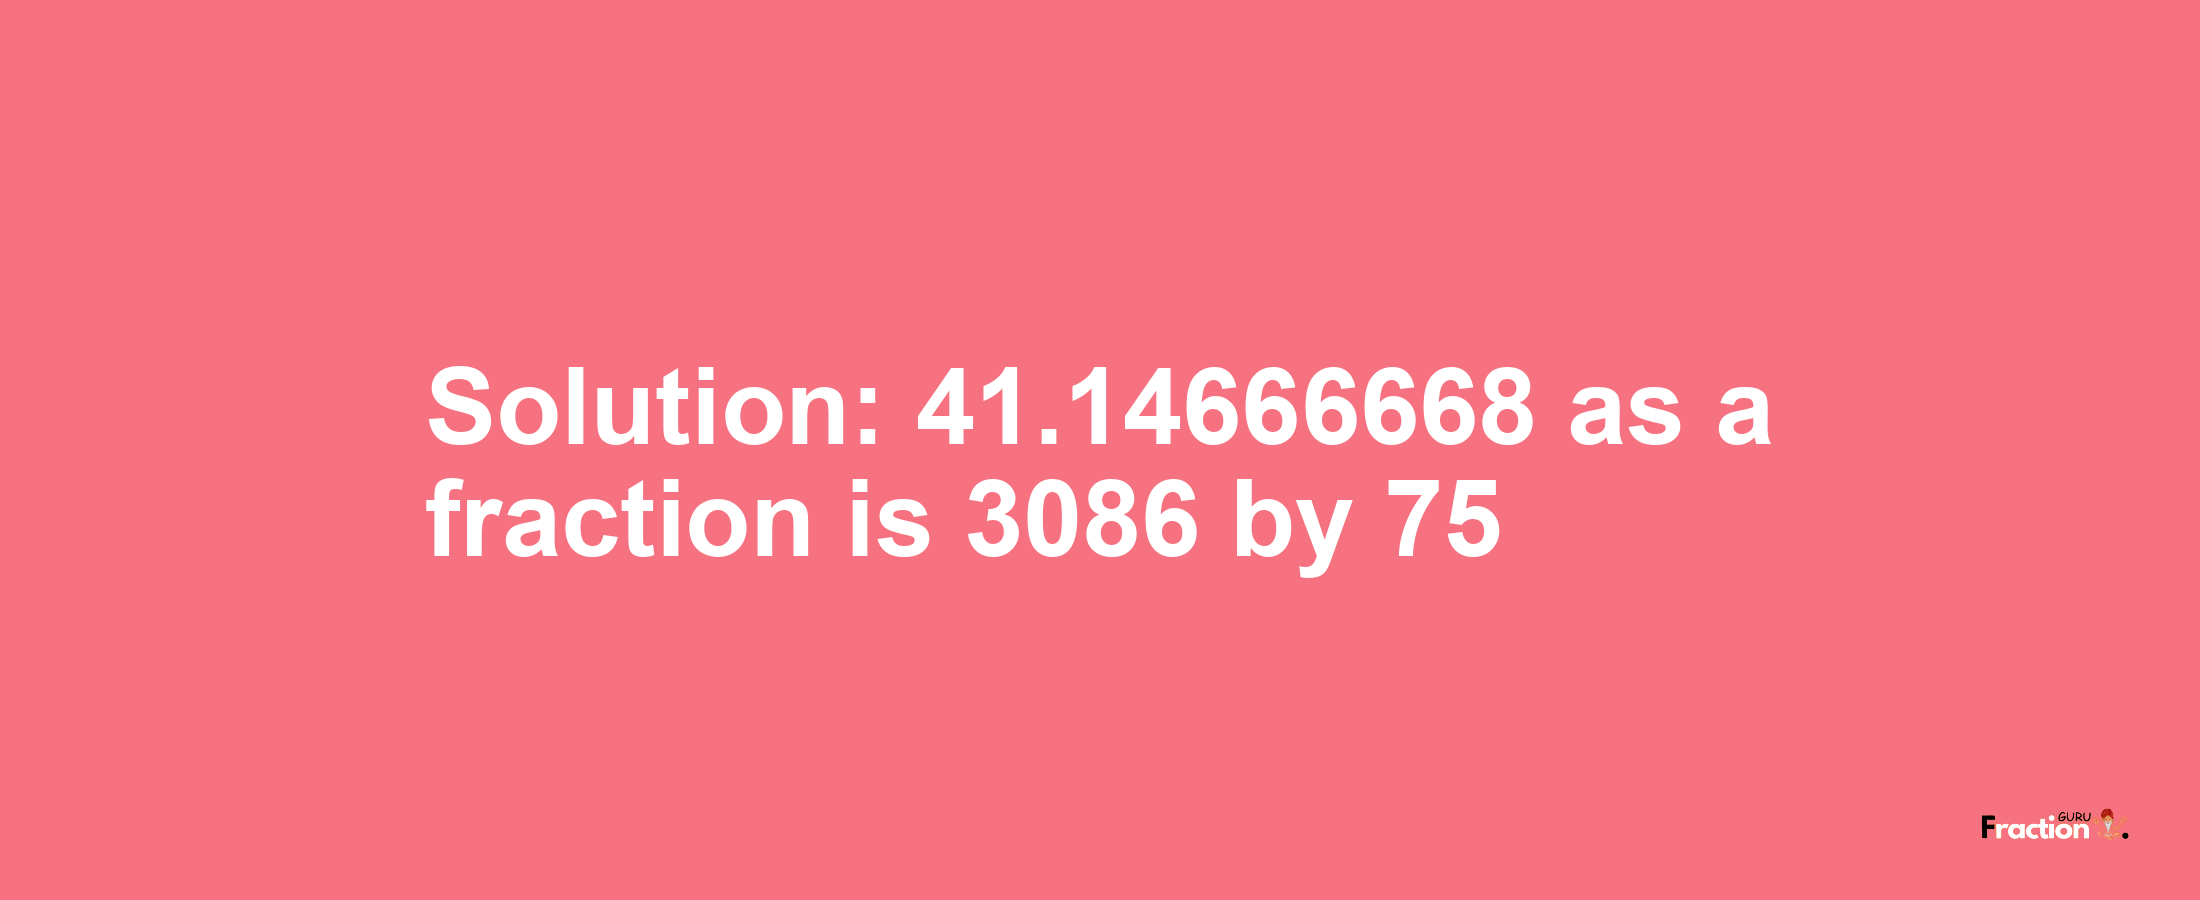 Solution:41.14666668 as a fraction is 3086/75